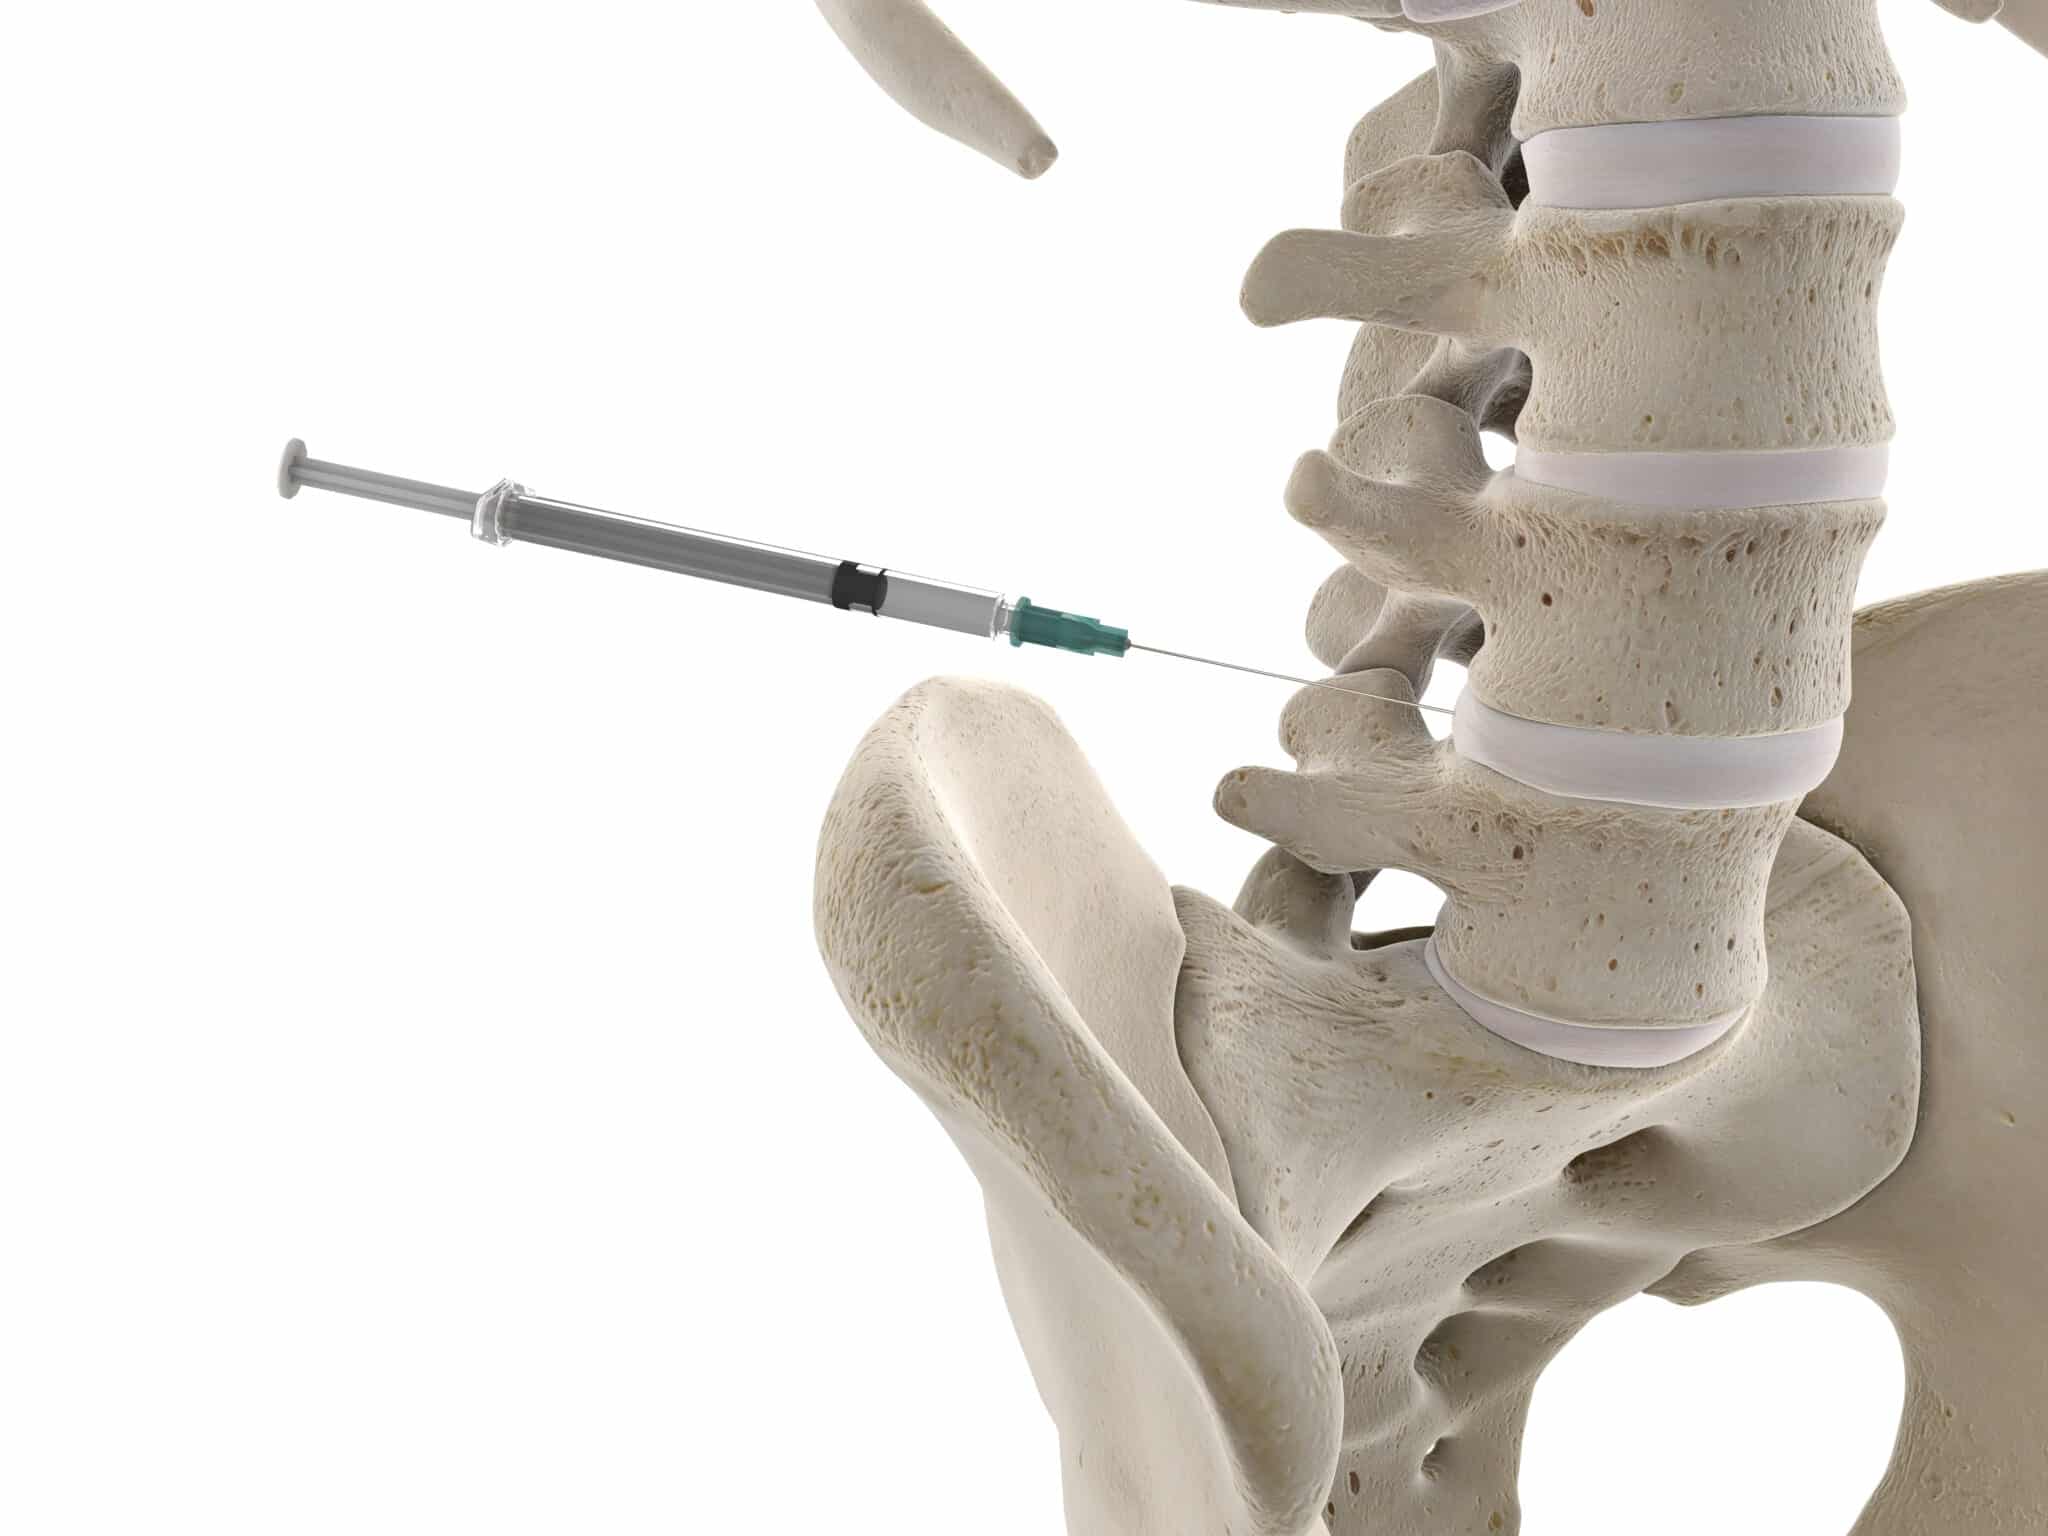 3d rendered medically accurate illustration of a lumbar spine injection